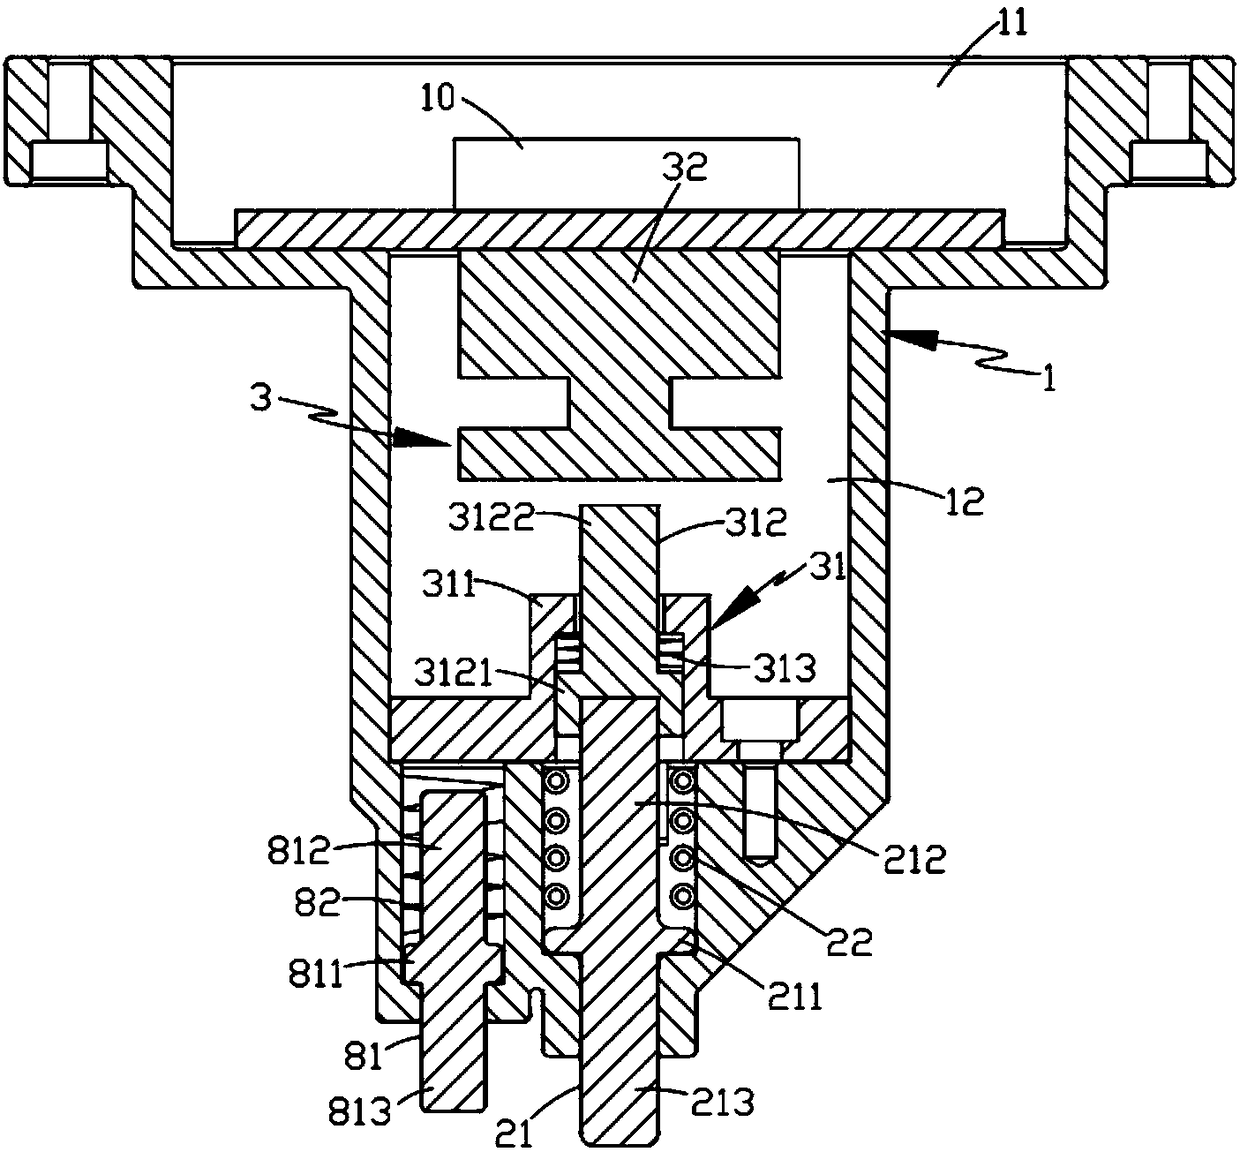 A high-frequency induction welding method for battery terminals